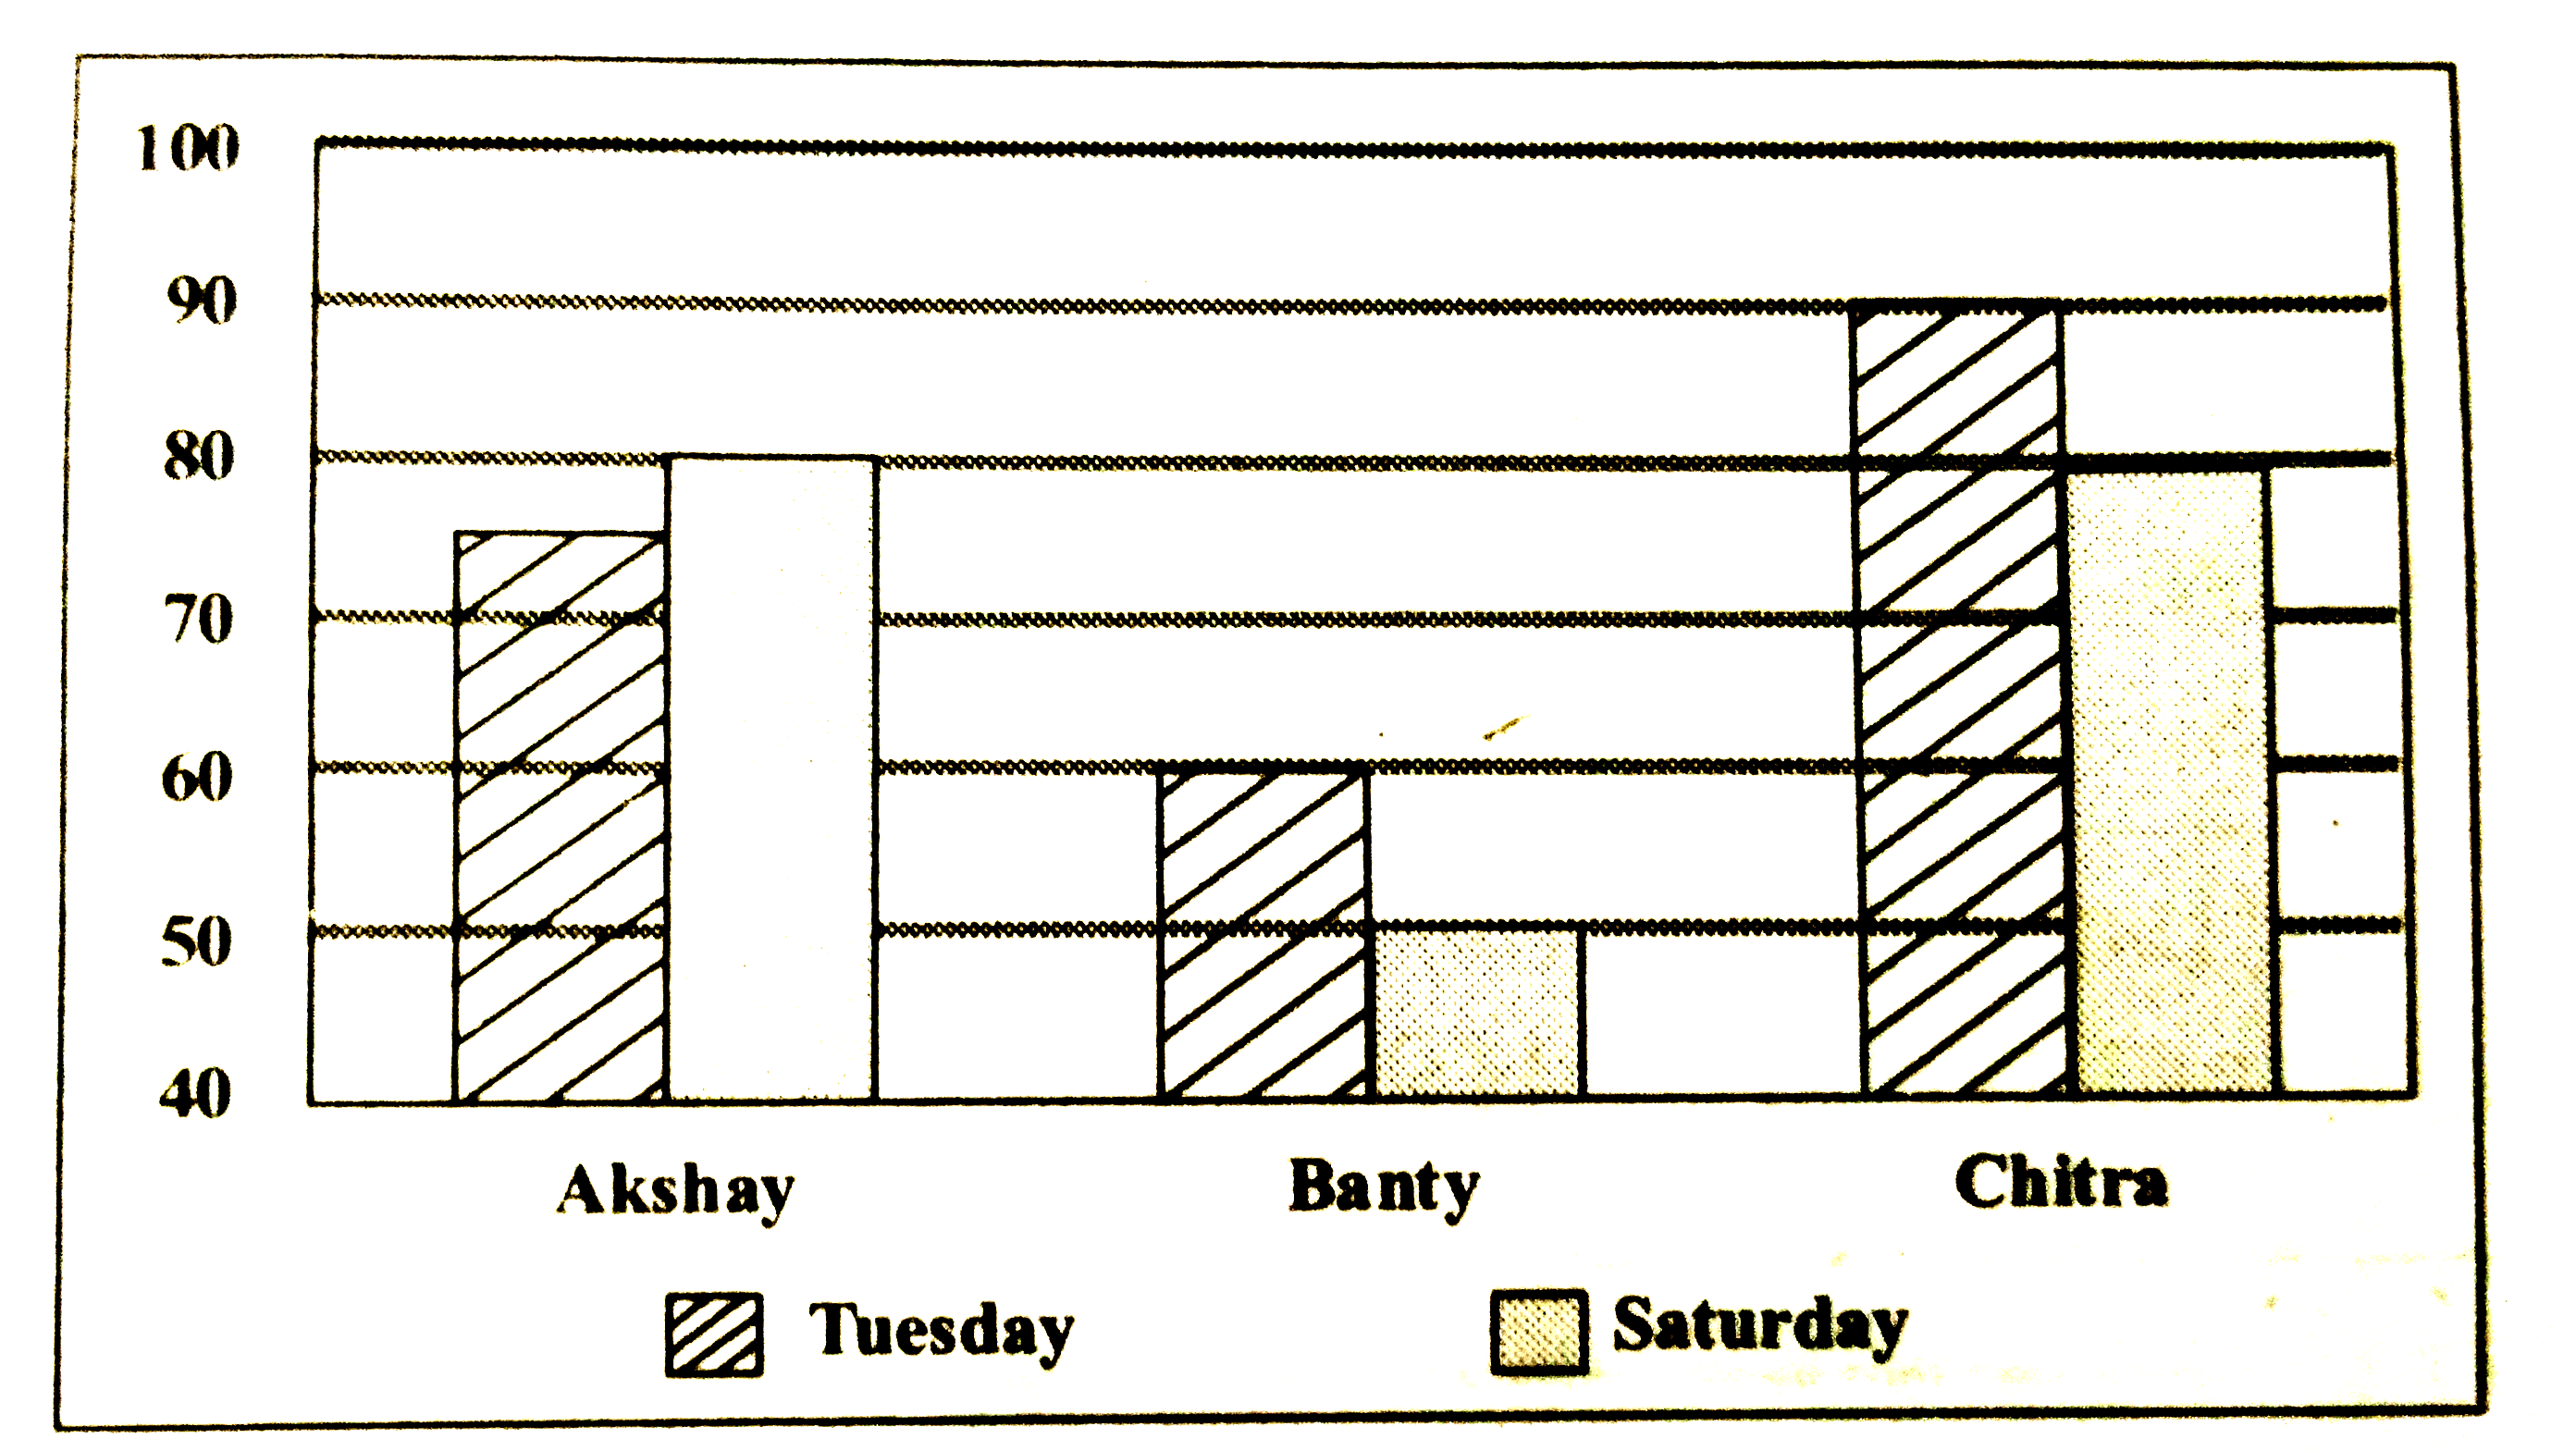 Number of queries resolved by Banty on Tuesday is 270 and call recived by him is 25% more than query resolved by Akshay on that day. Dind the number of cell received  by Akhay on Tuesday.